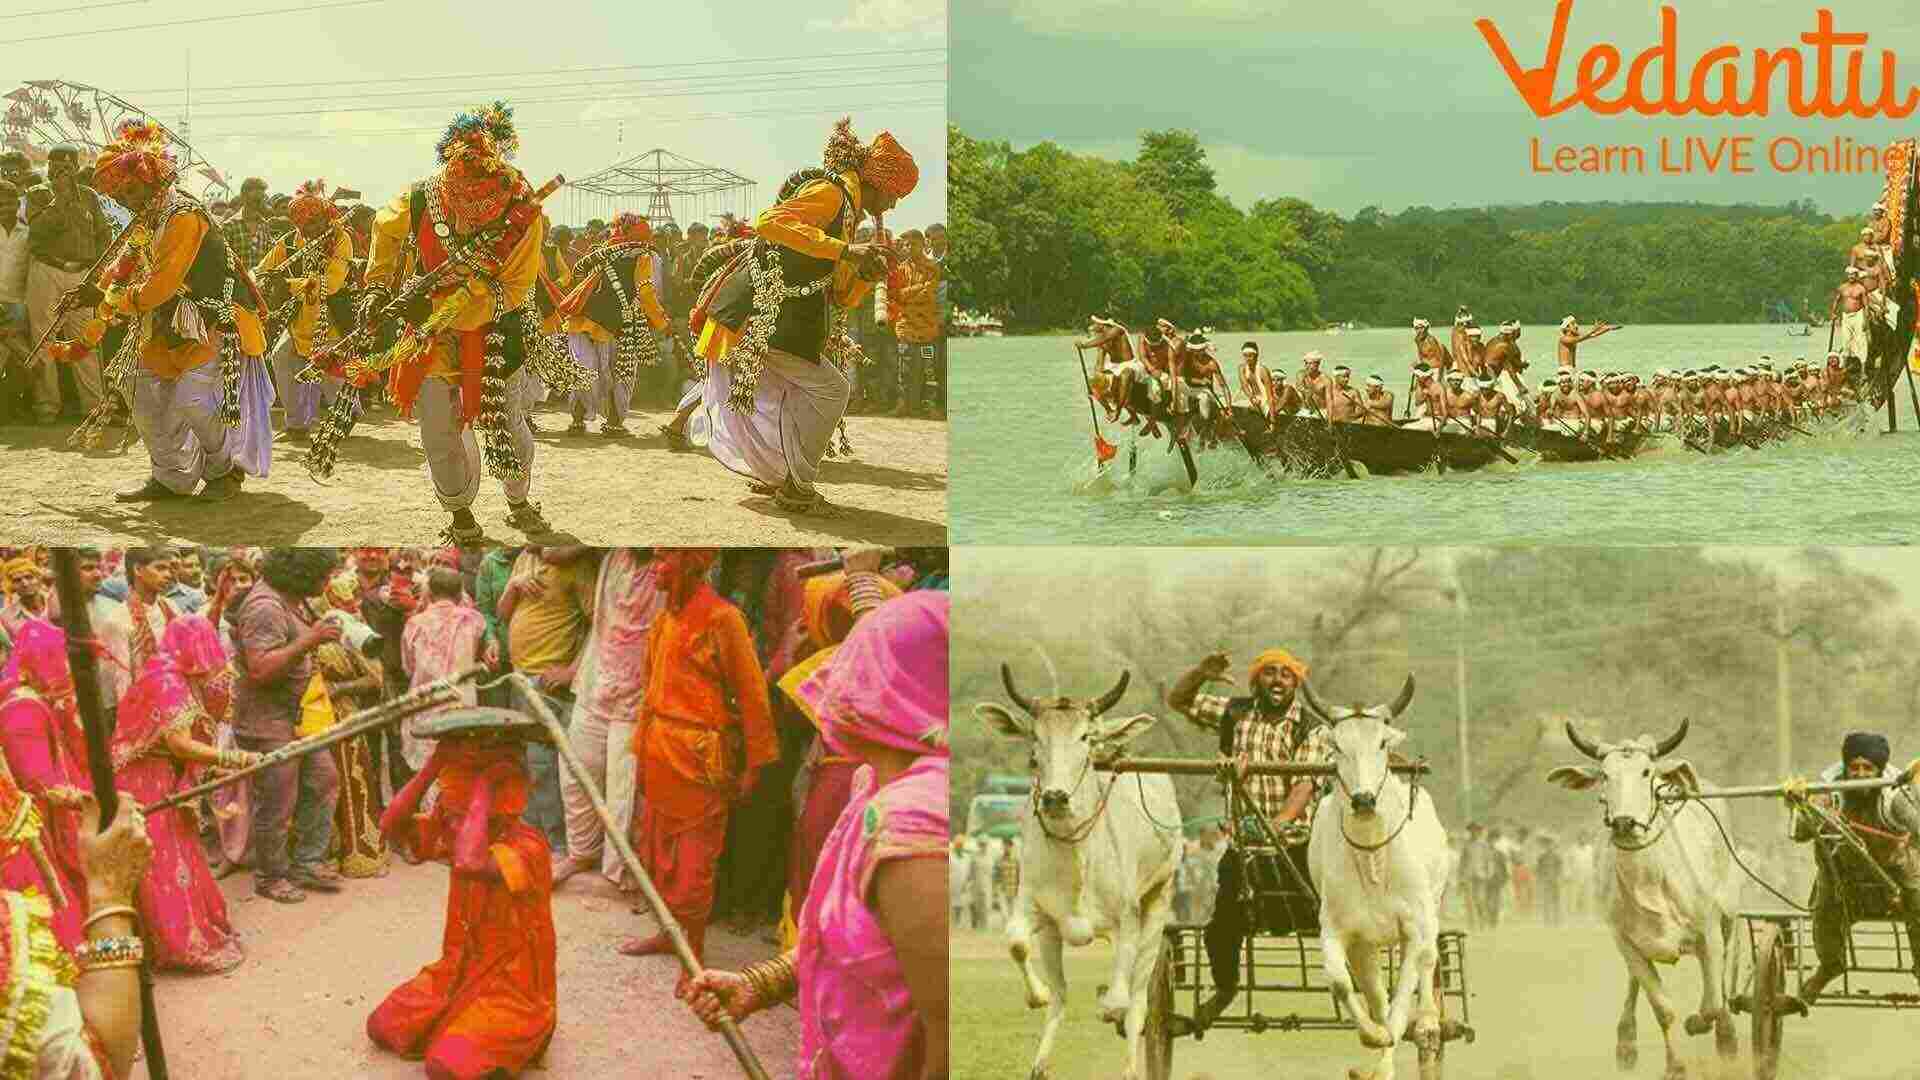 Unusual Festivals that are Celebrated in India